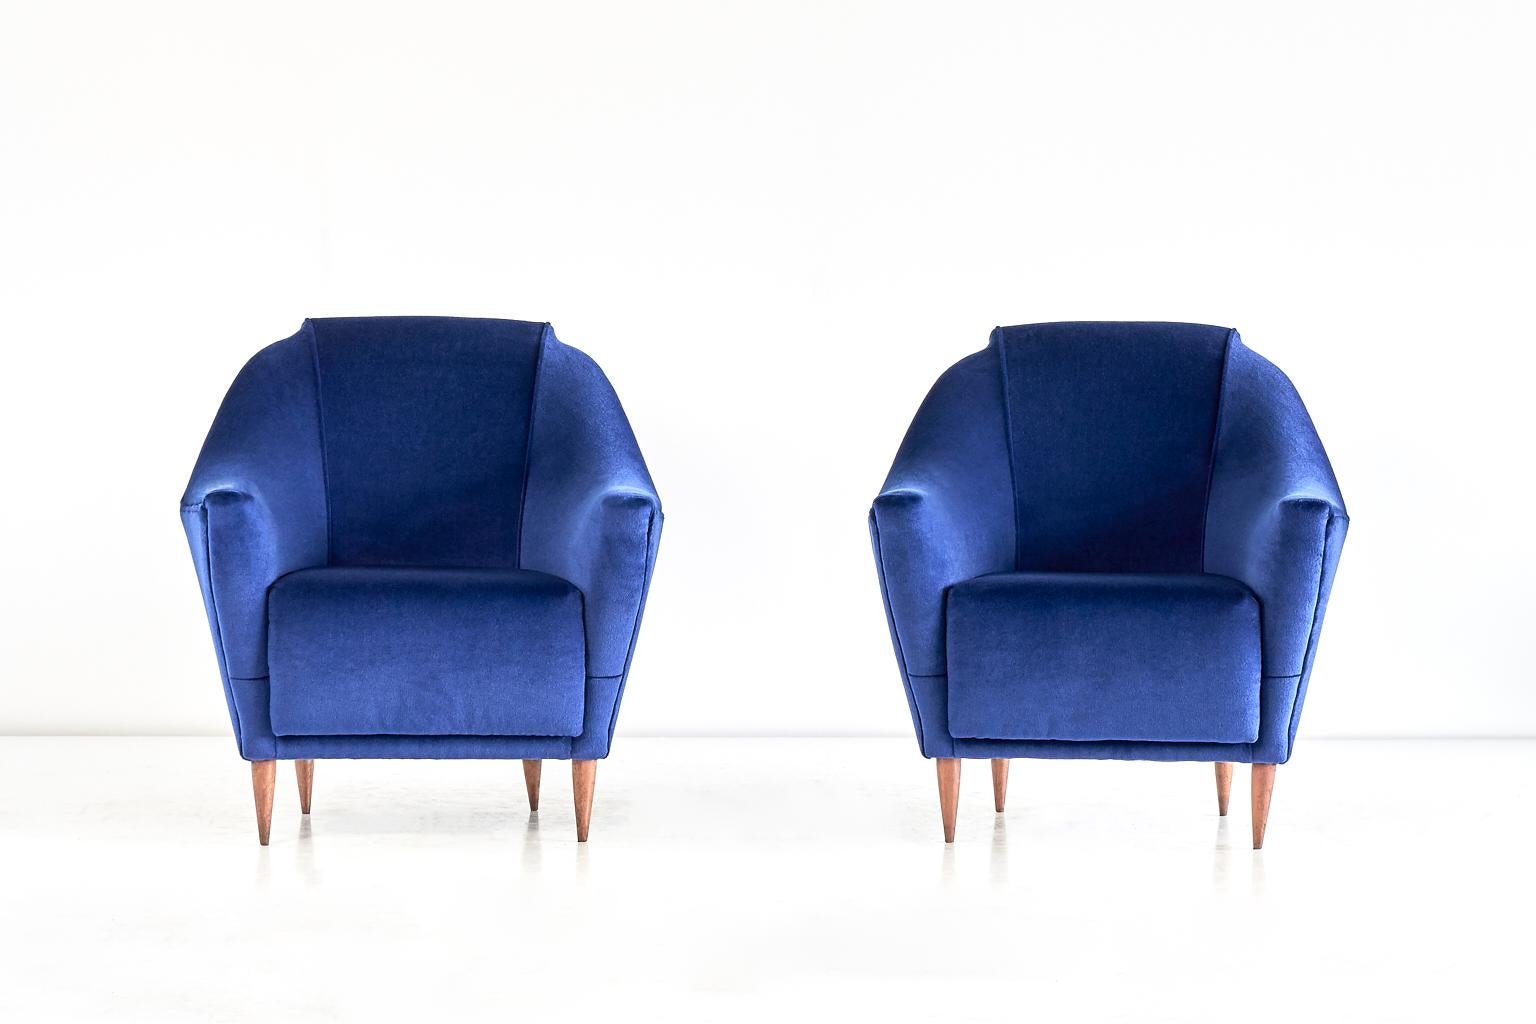 Mohair Pair of Ico Parisi Armchairs in Blue Velvet for Ariberto Colombo, Italy, 1951 For Sale